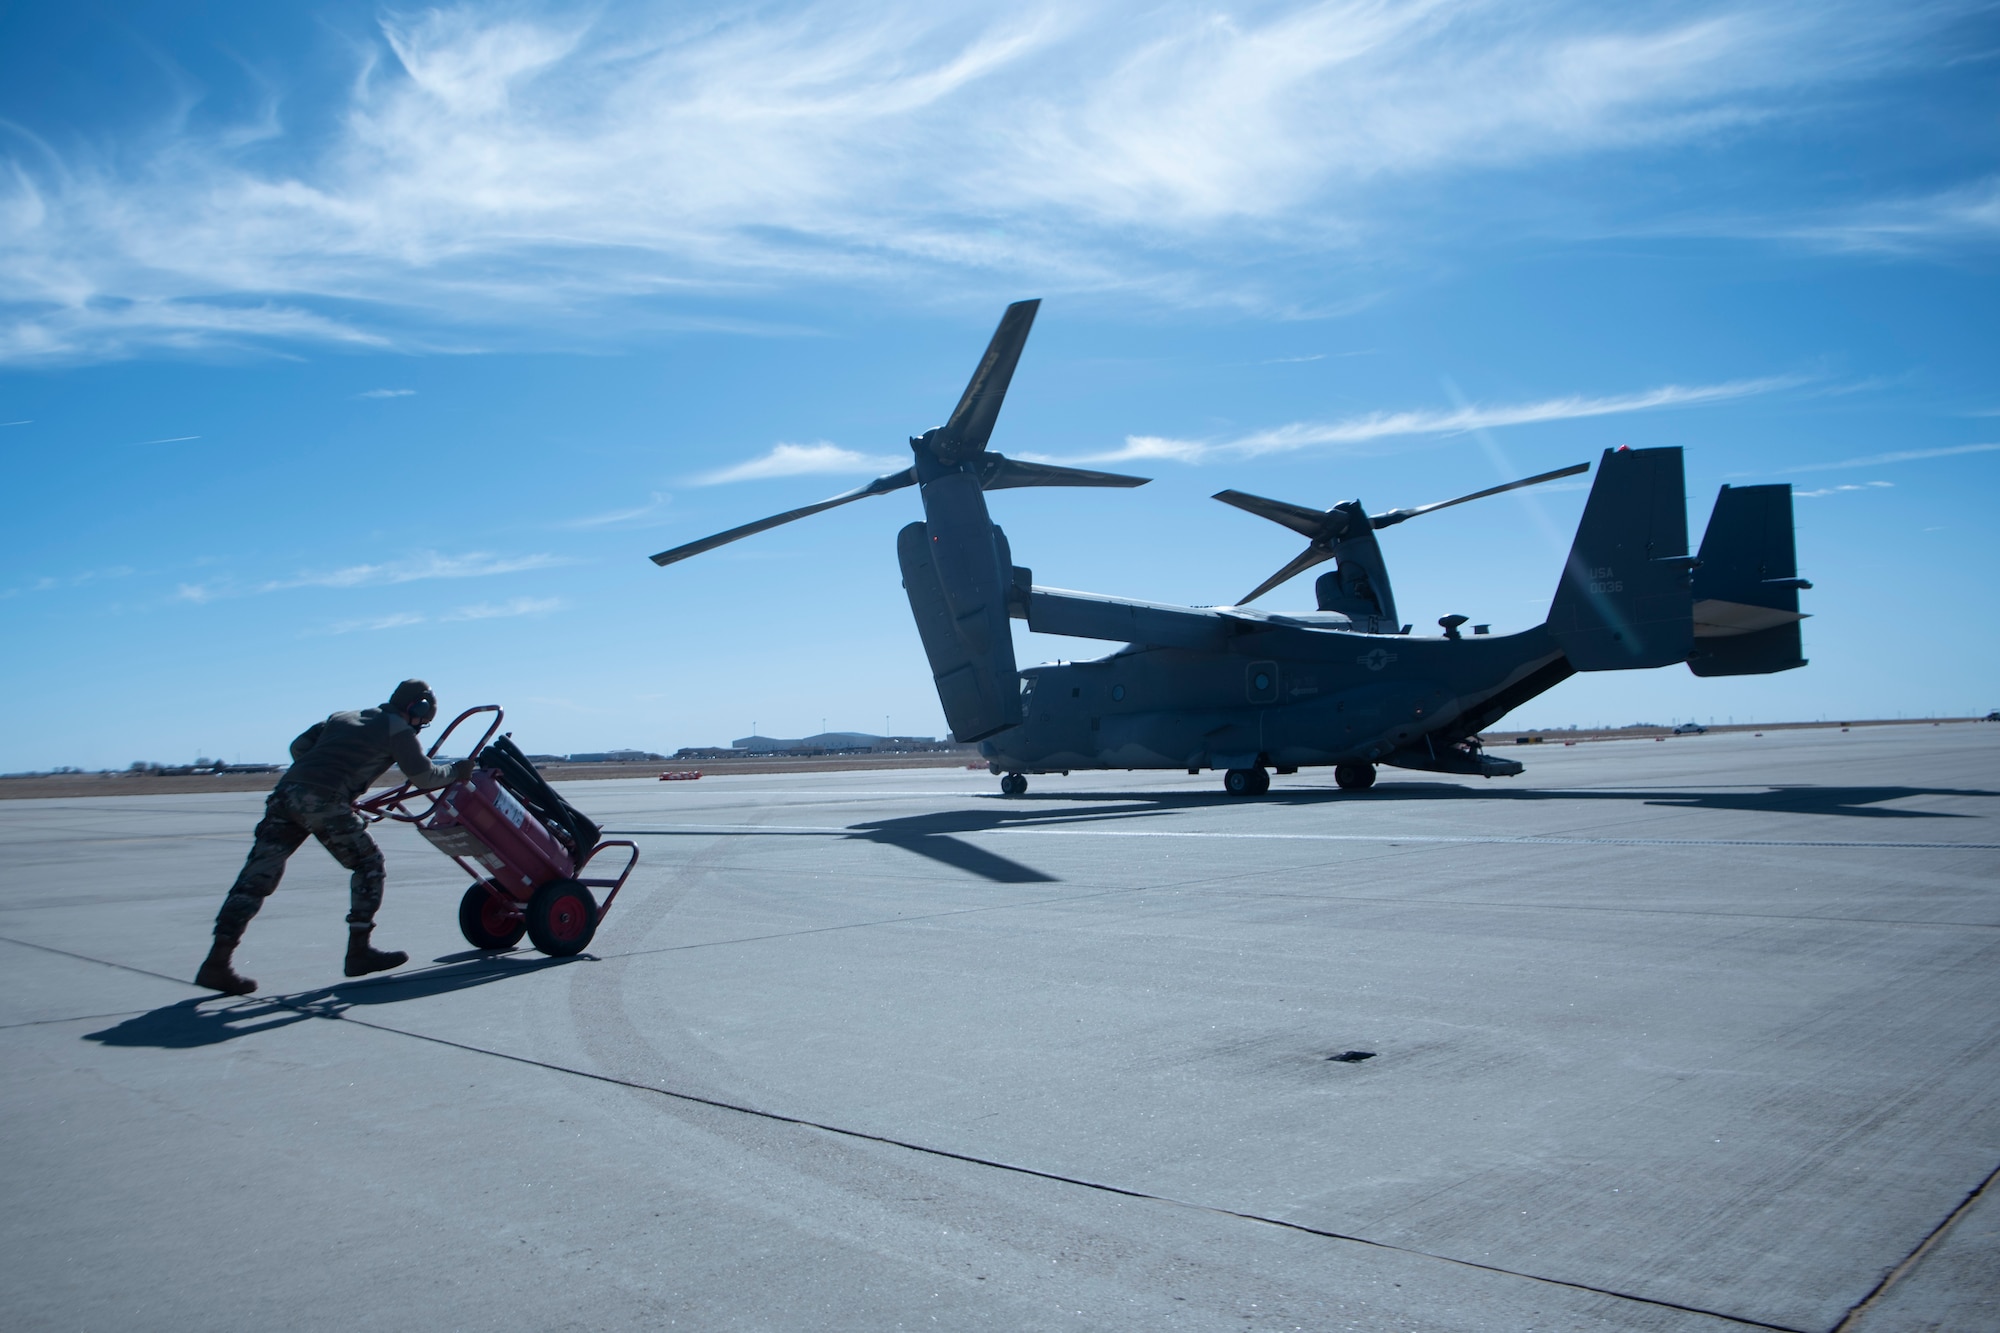 An Airman pushes a cart towards a plane before refueling it